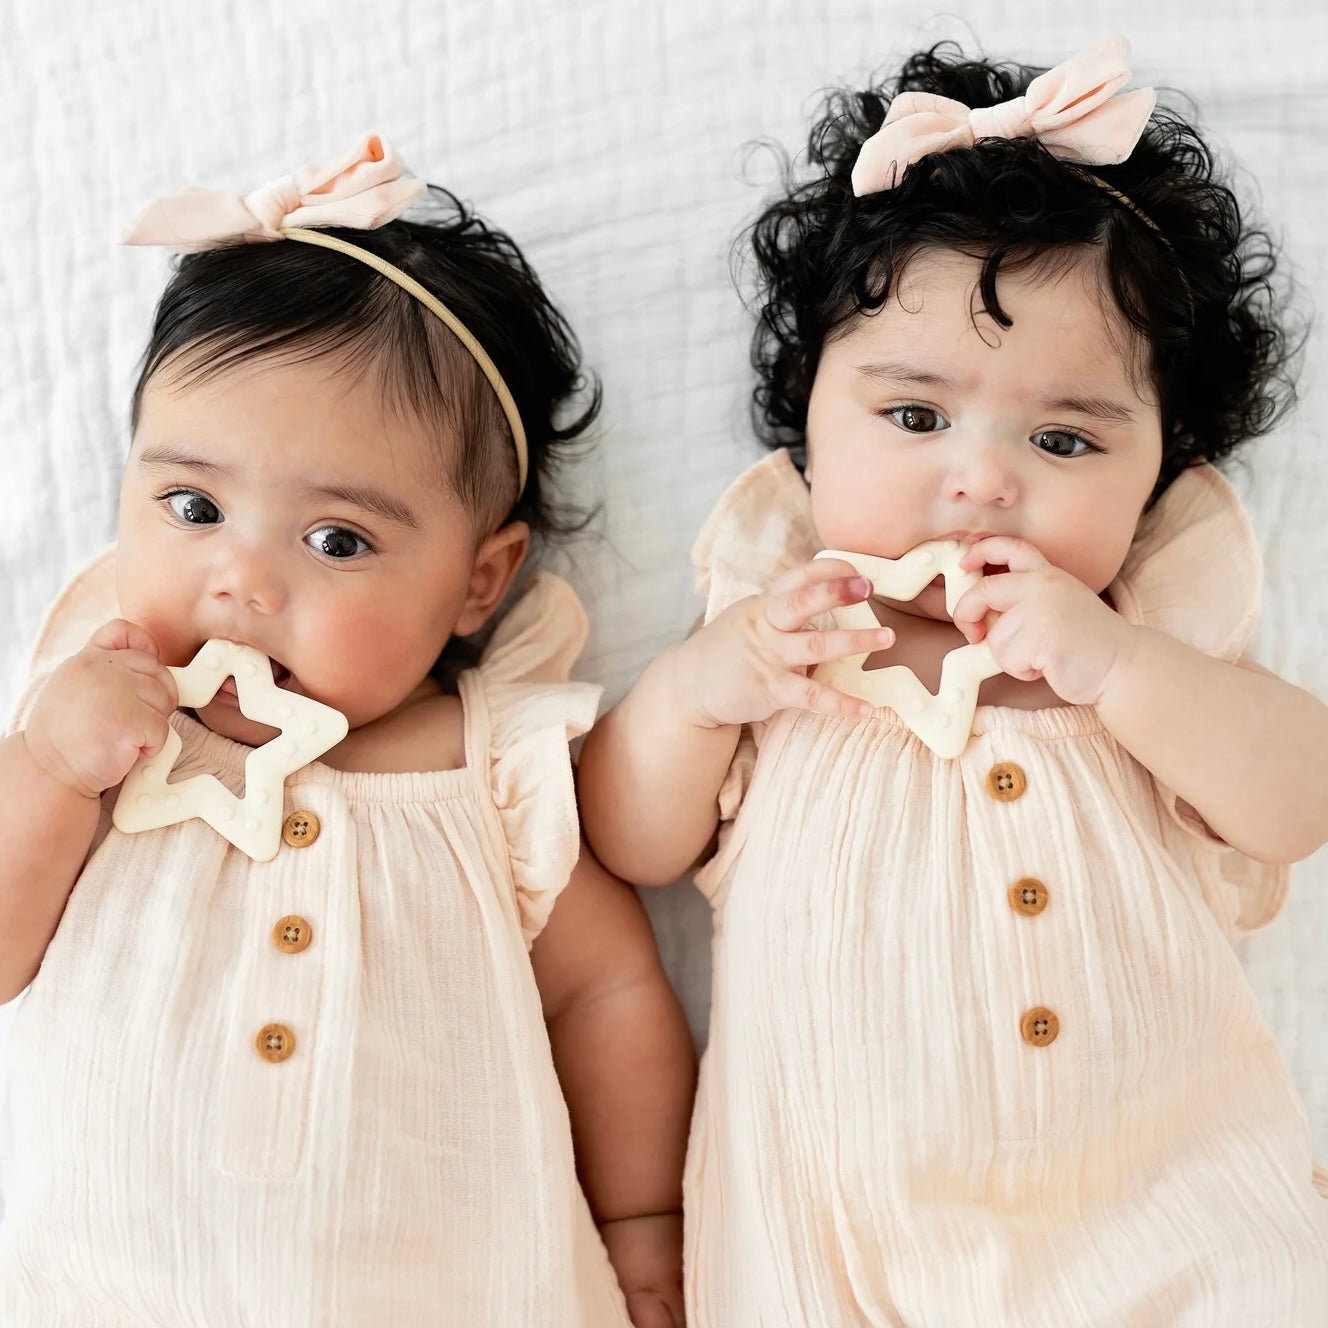 Twin girls playing with Star teethers